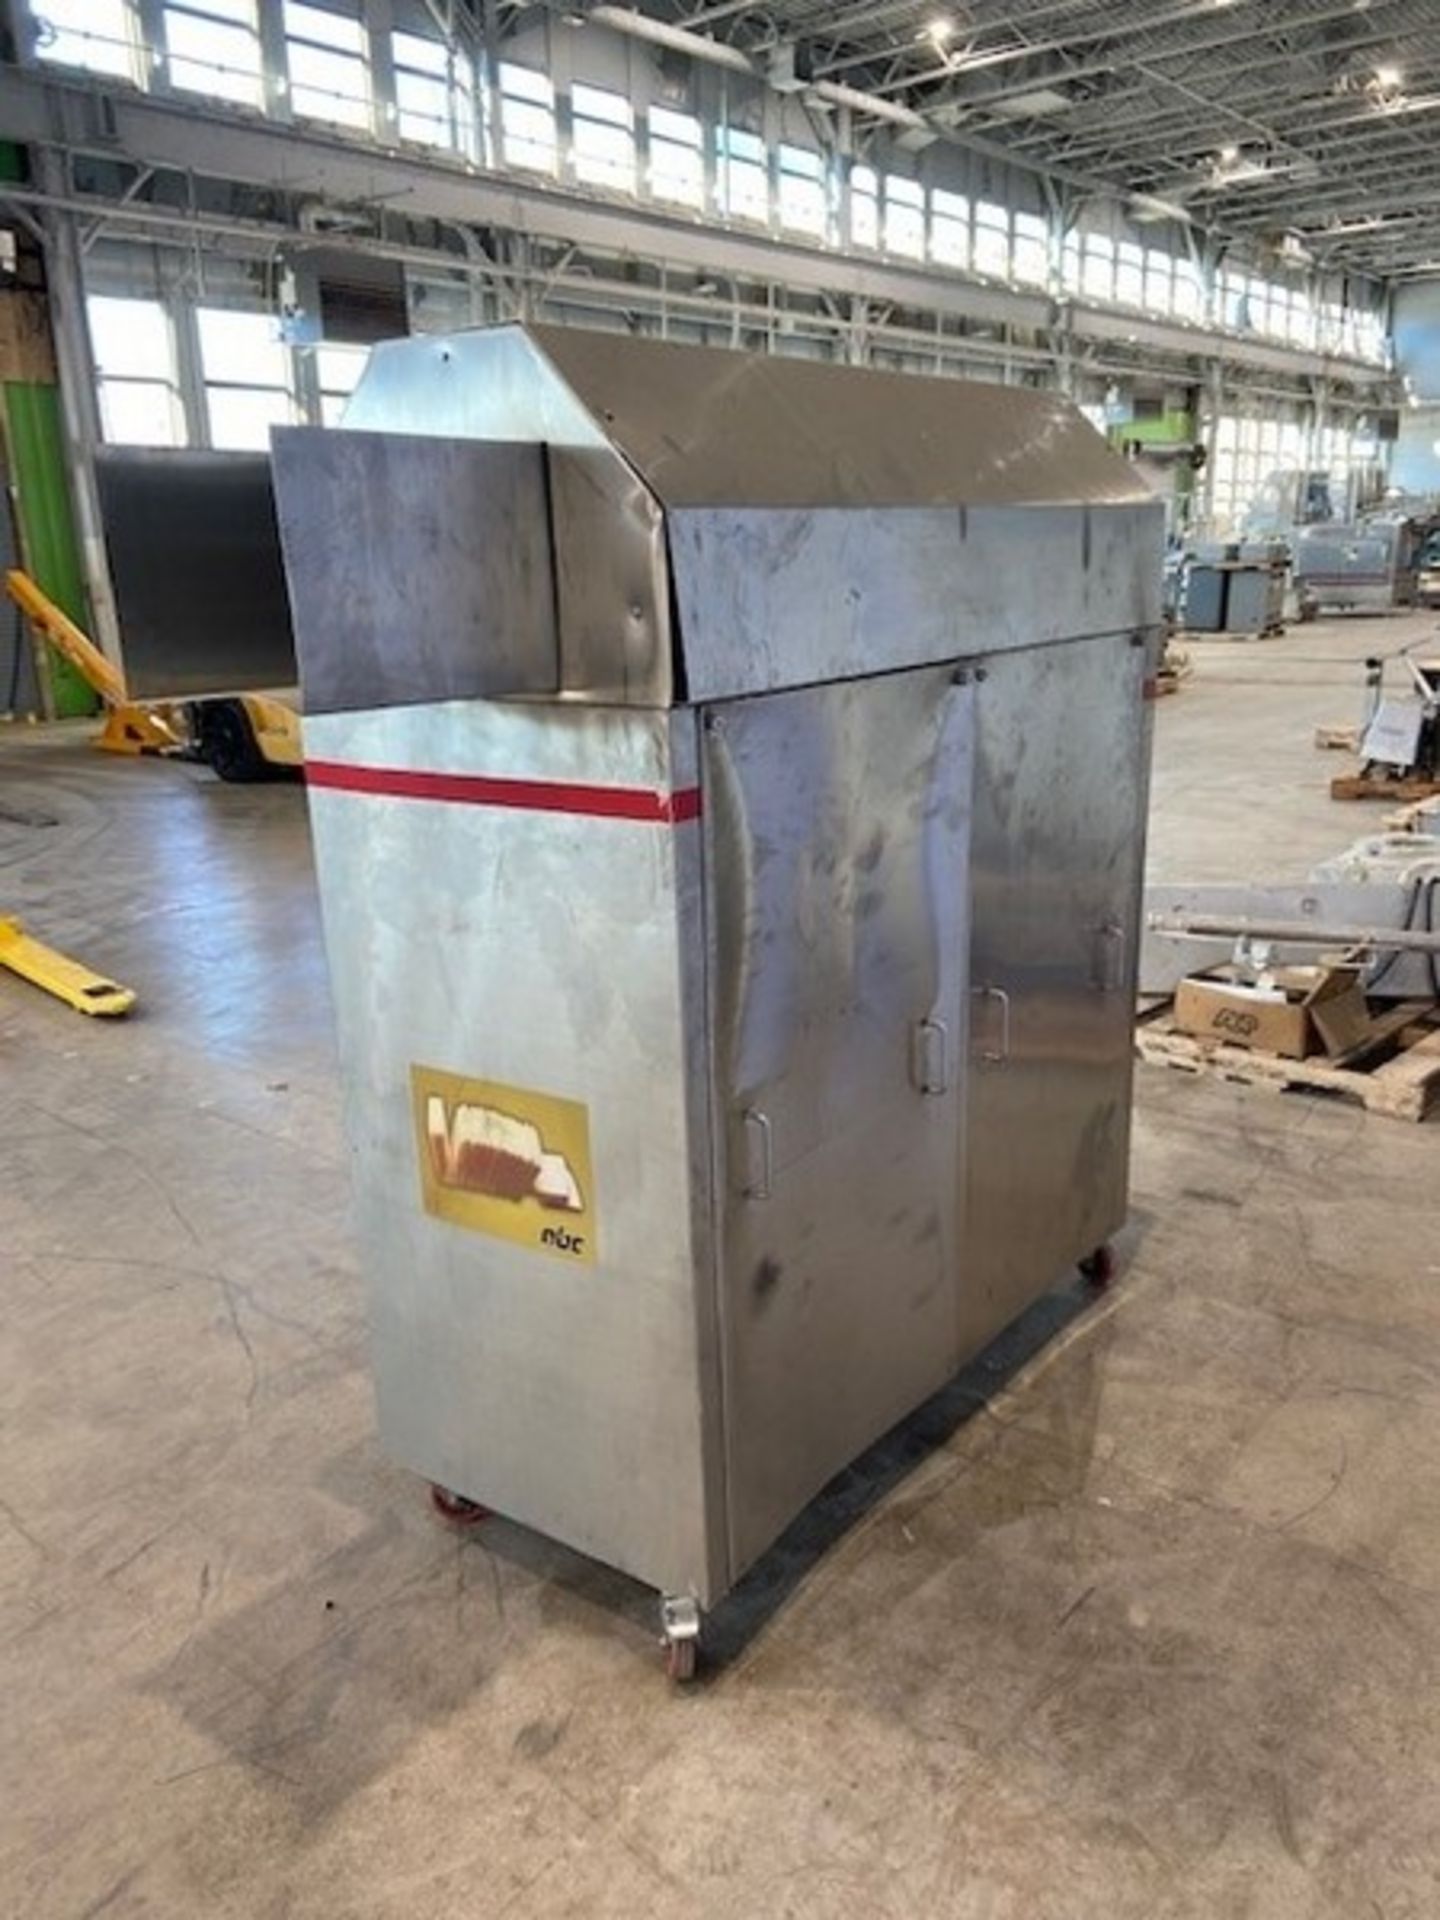 2013/2014 ABC Butter Cutter, 1500 KG/Hr., MOC: AISI304 (INV#80101)(Located @ the MDG Auction - Image 5 of 7